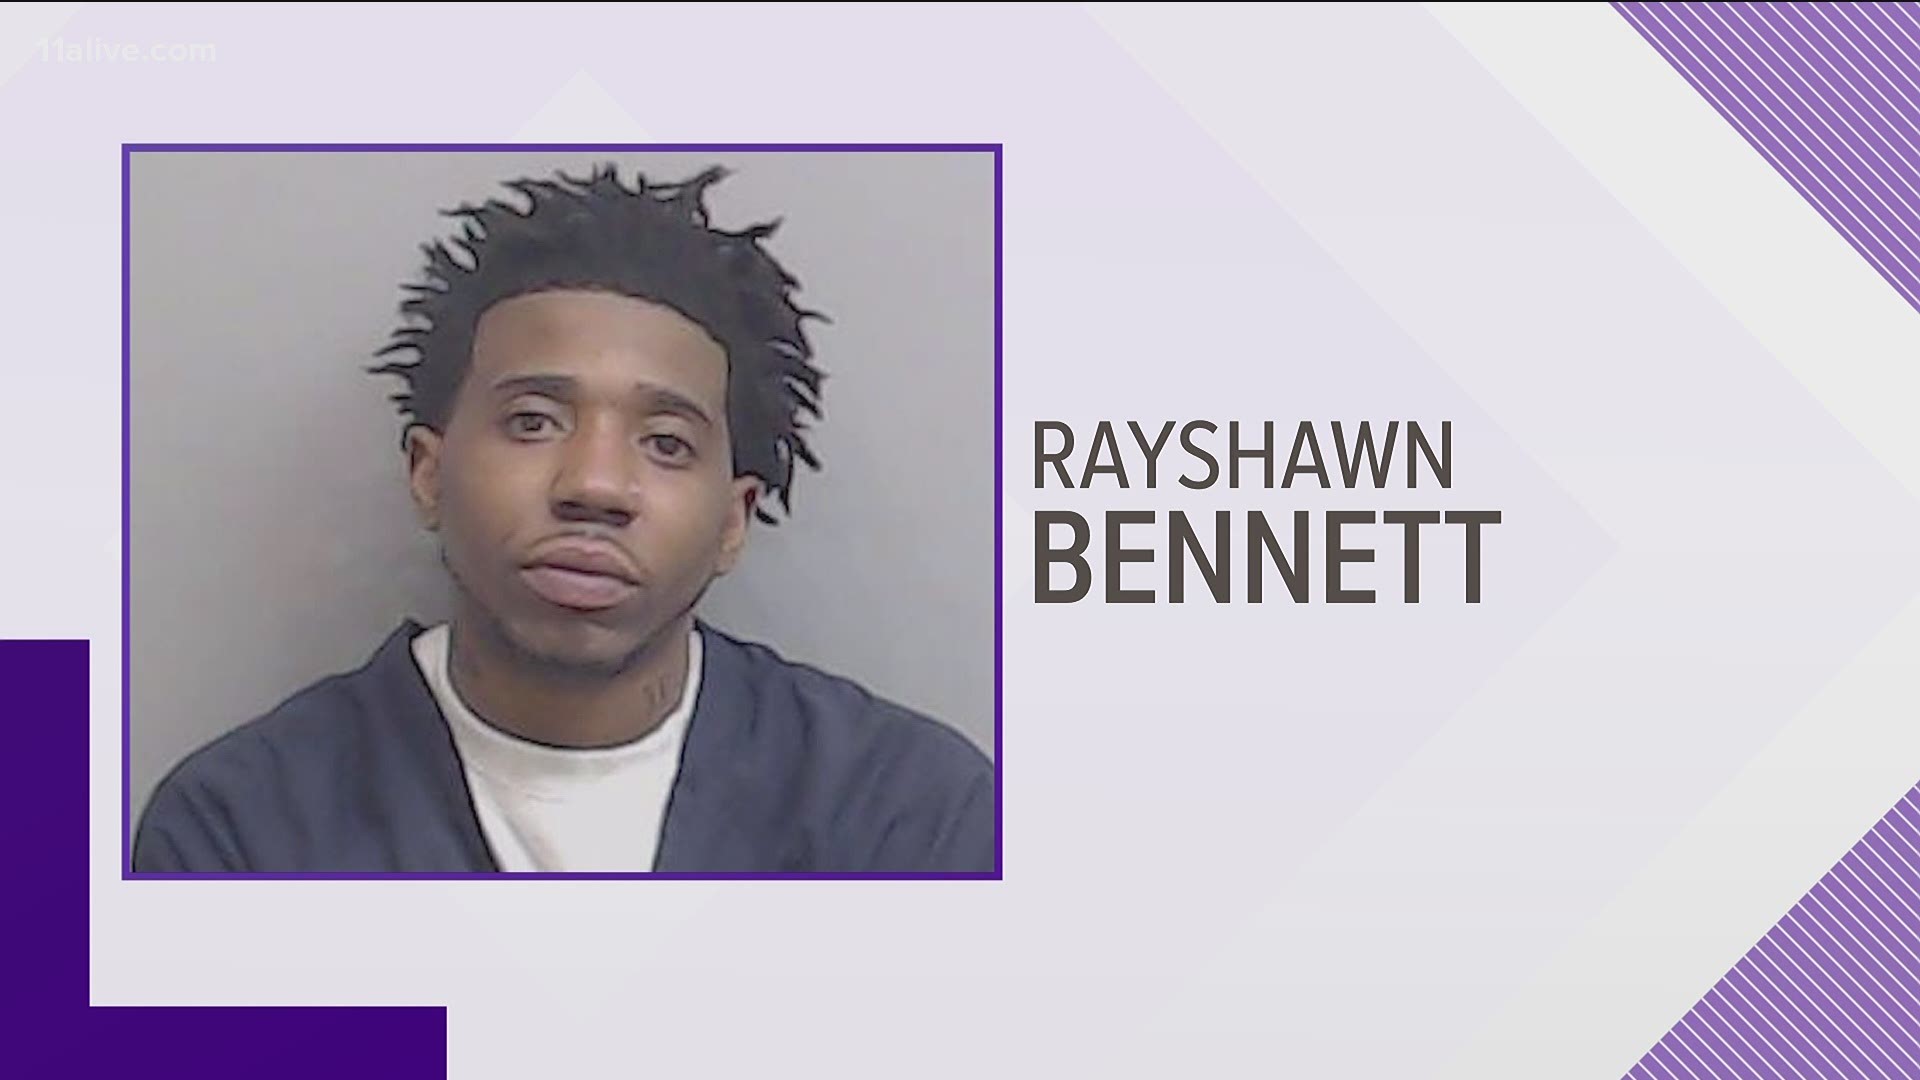 Atlanta Police said he turned himself in. He was wanted in connection with a homicide investigation.